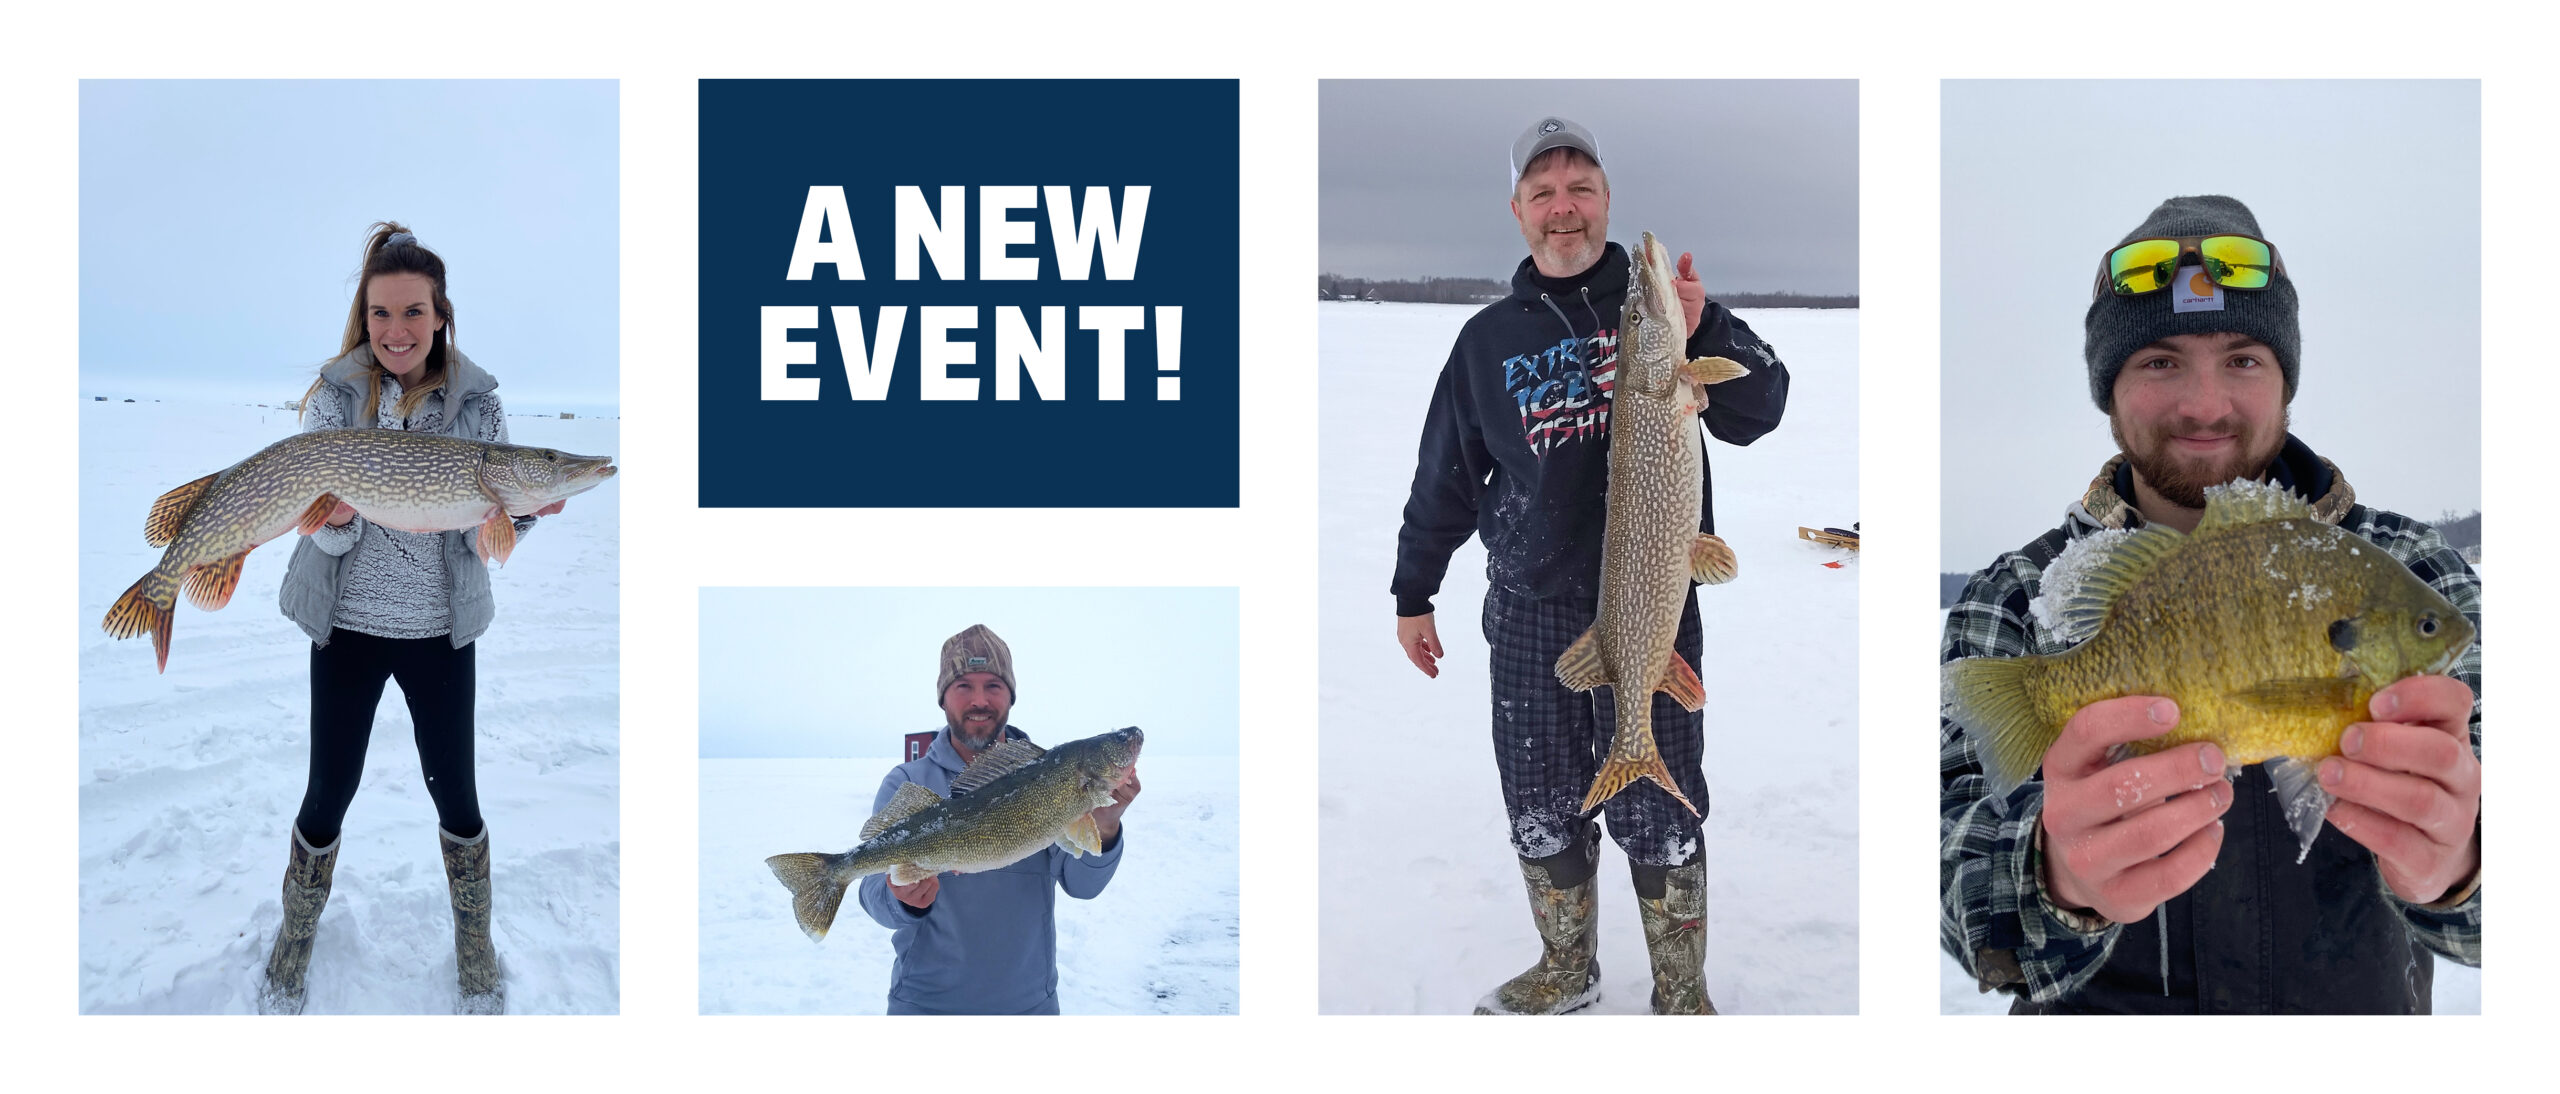 Americas Ice Fishing Tournament Presented Virtually by the Brainerd